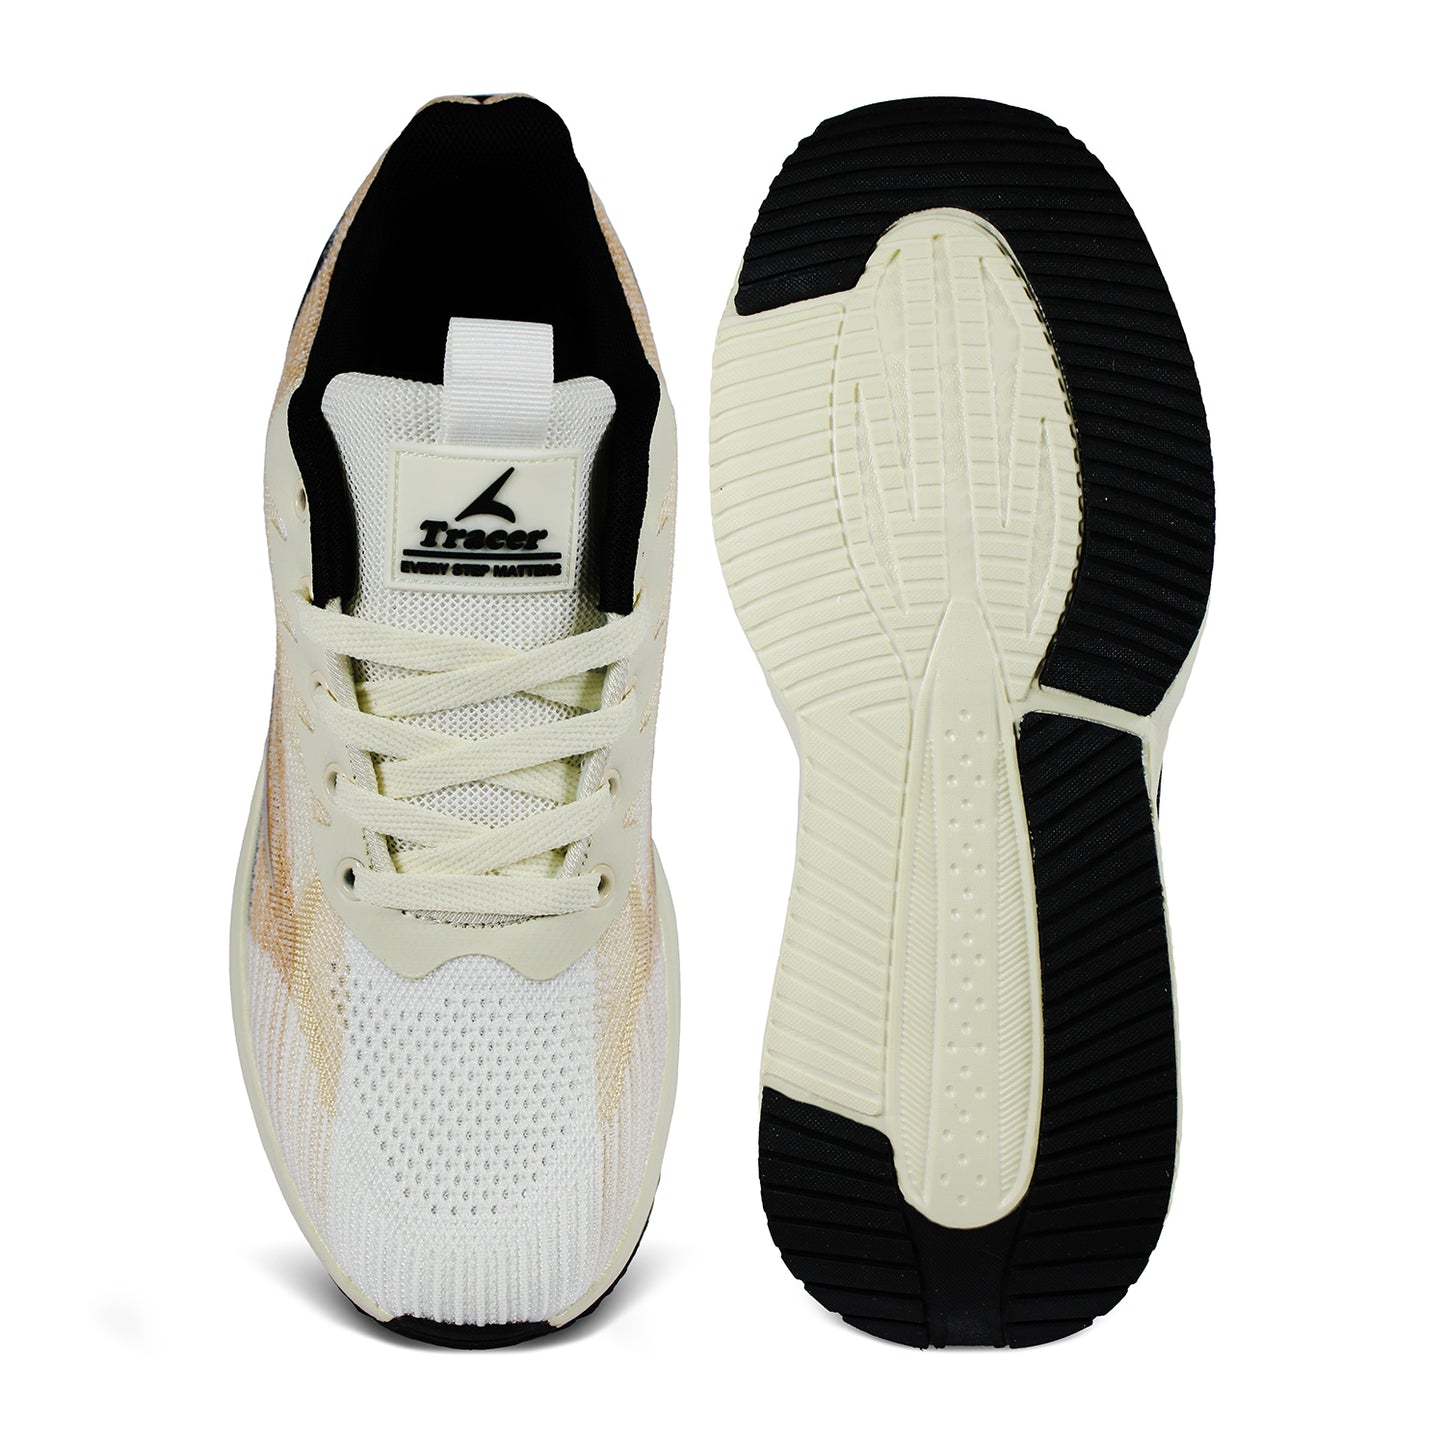 Tracer Shoes | Off White Grey | Men's Collection